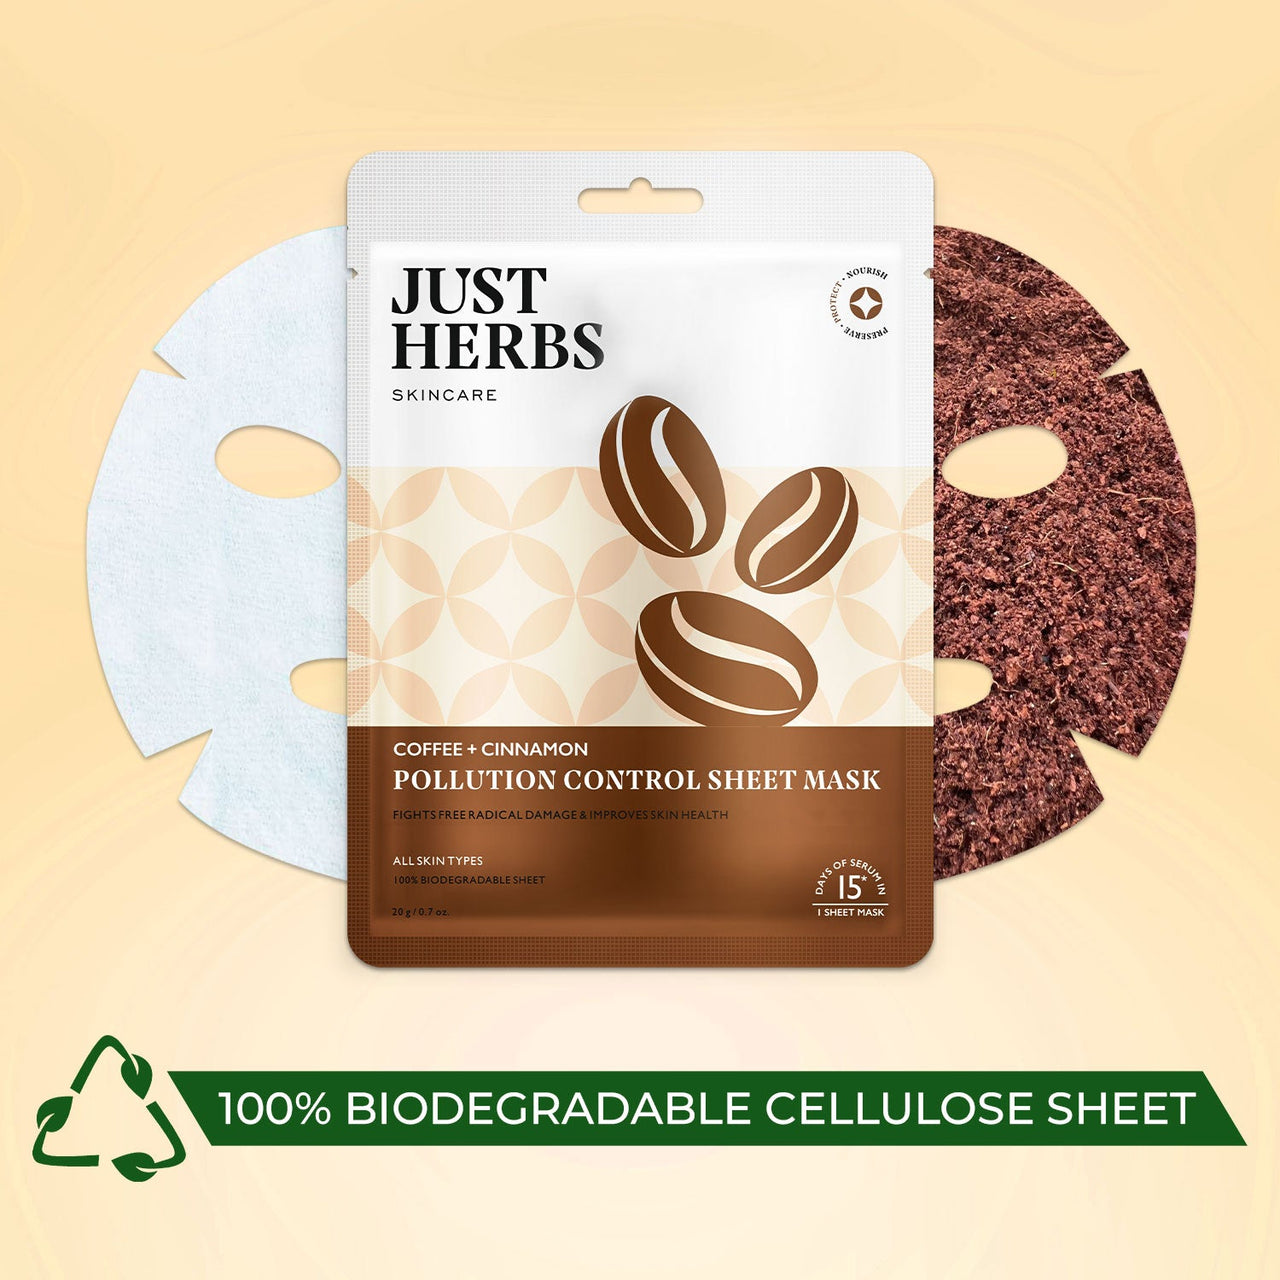 Coffee Sheet Mask with Cinnamon For Pollution Control - Pack of 4